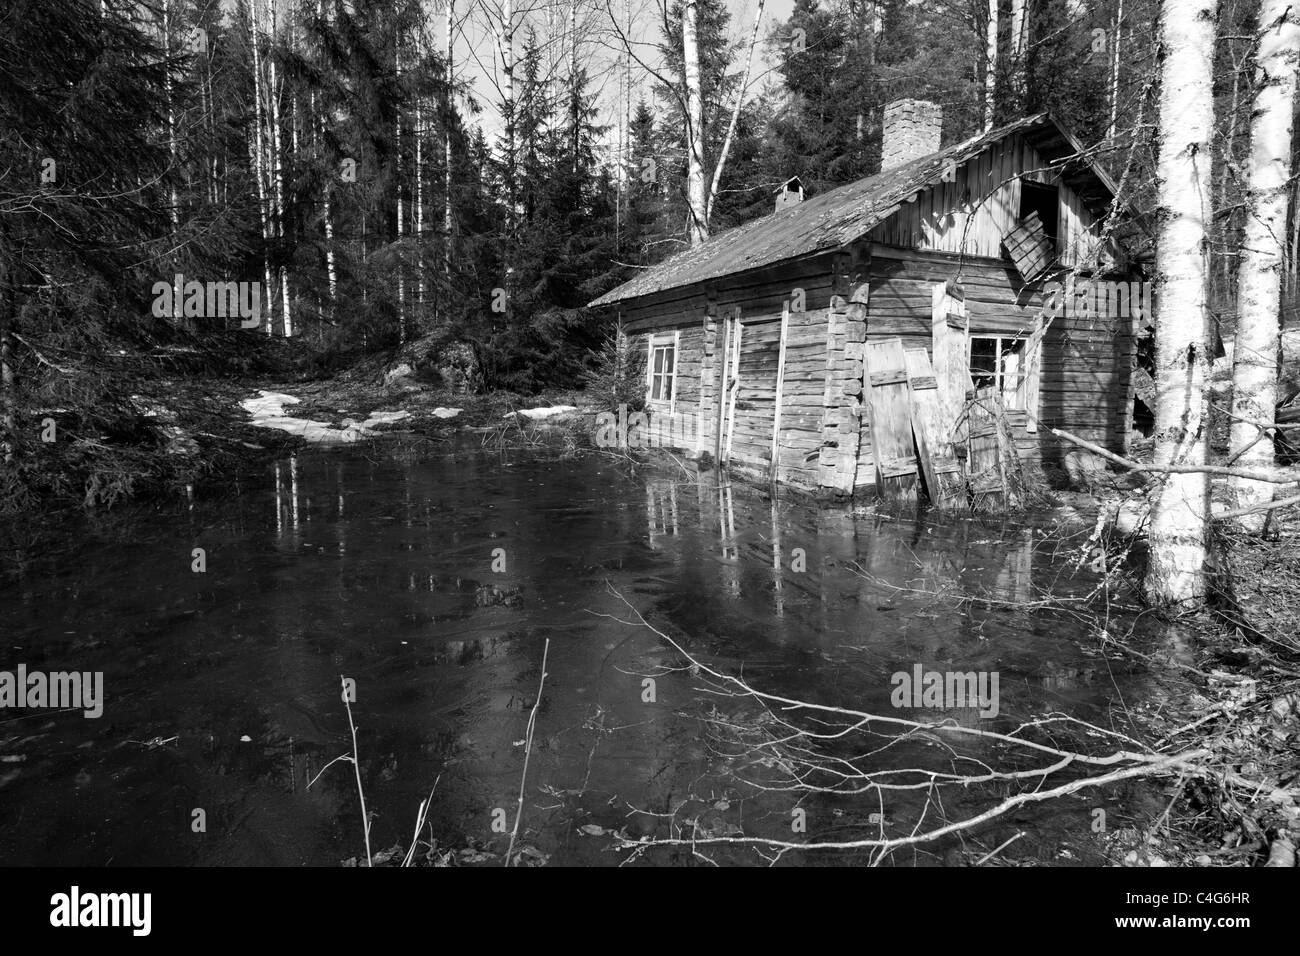 Old decaying wooden sauna made of logs flooded at Springtime , Finland Stock Photo